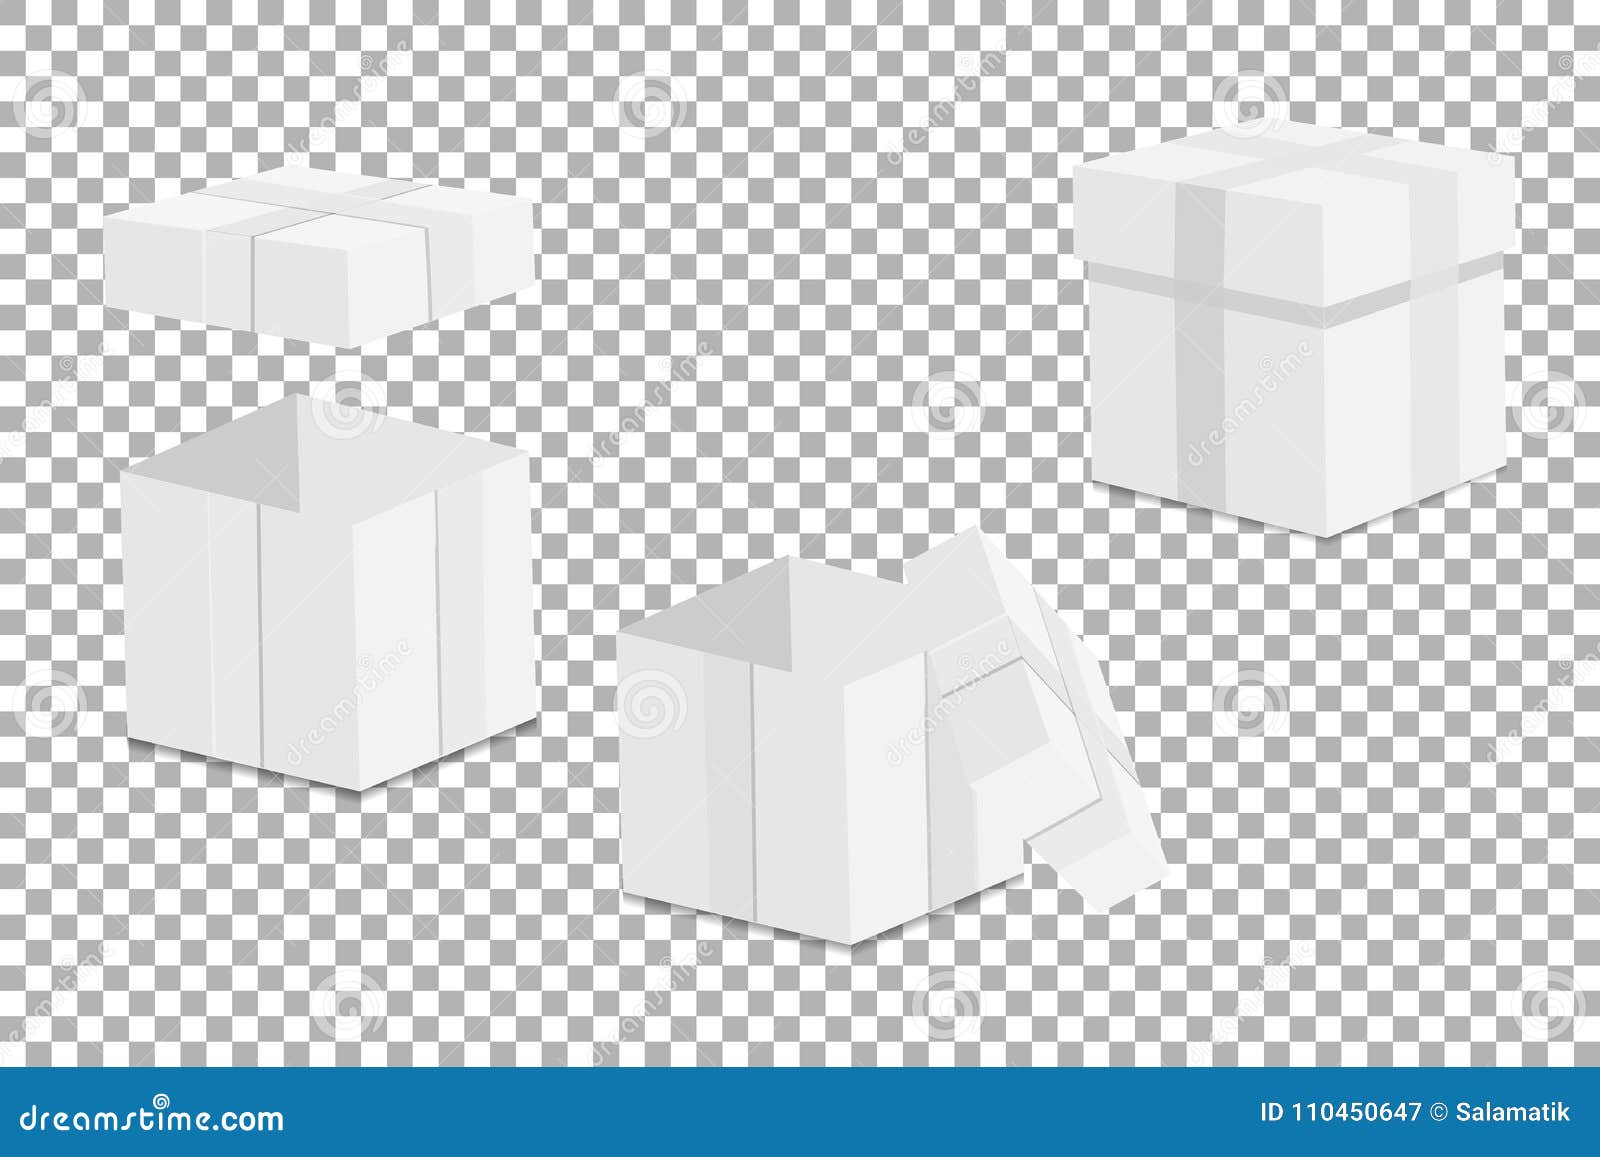 Download White Empty Mock-up Gift Box . On A Transparent Background ...